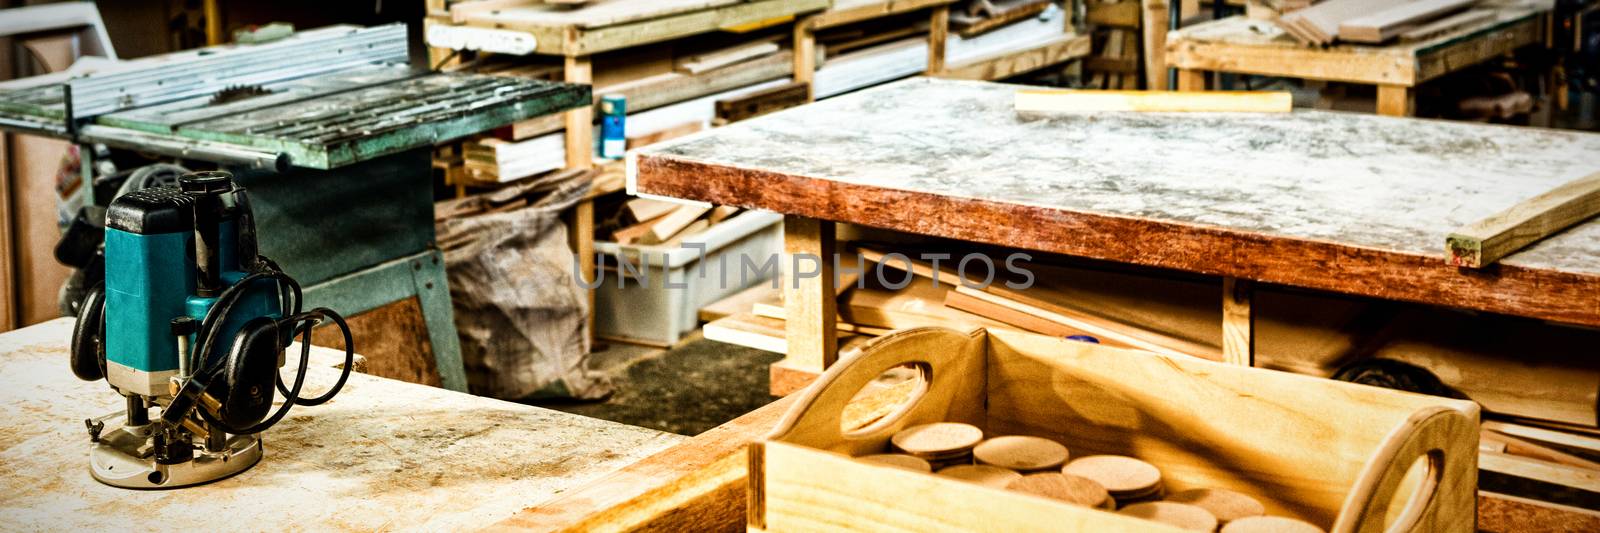 Carpentry workshop with wood plank and machinery